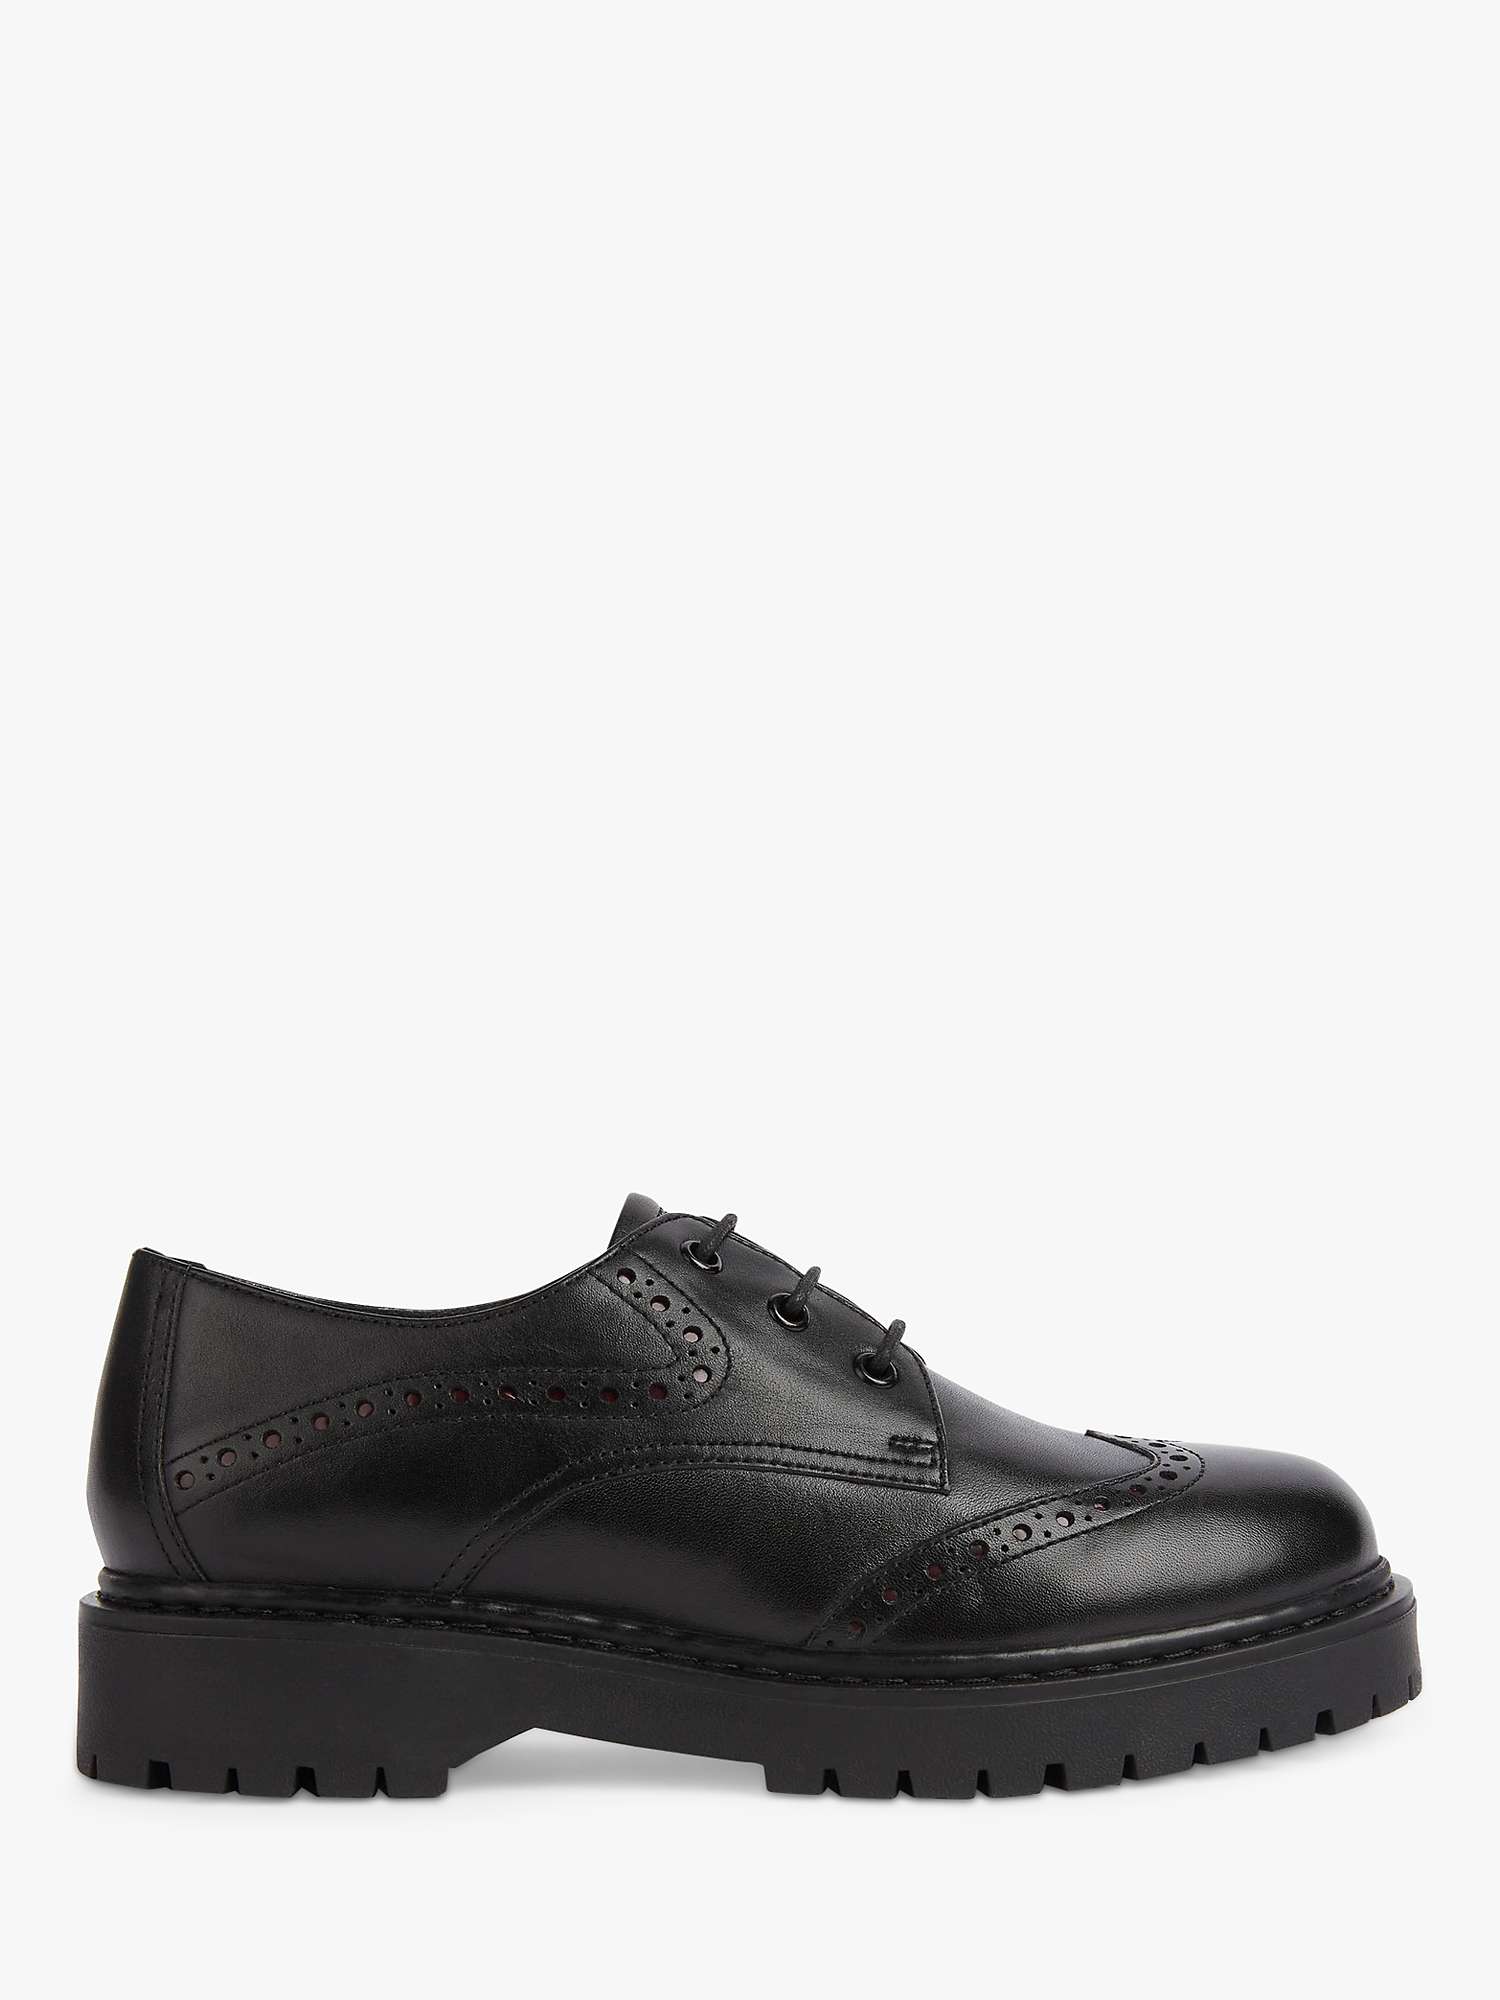 Geox D Bleyze H Smooth Leather Chunky Brogues, Black at John Lewis ...